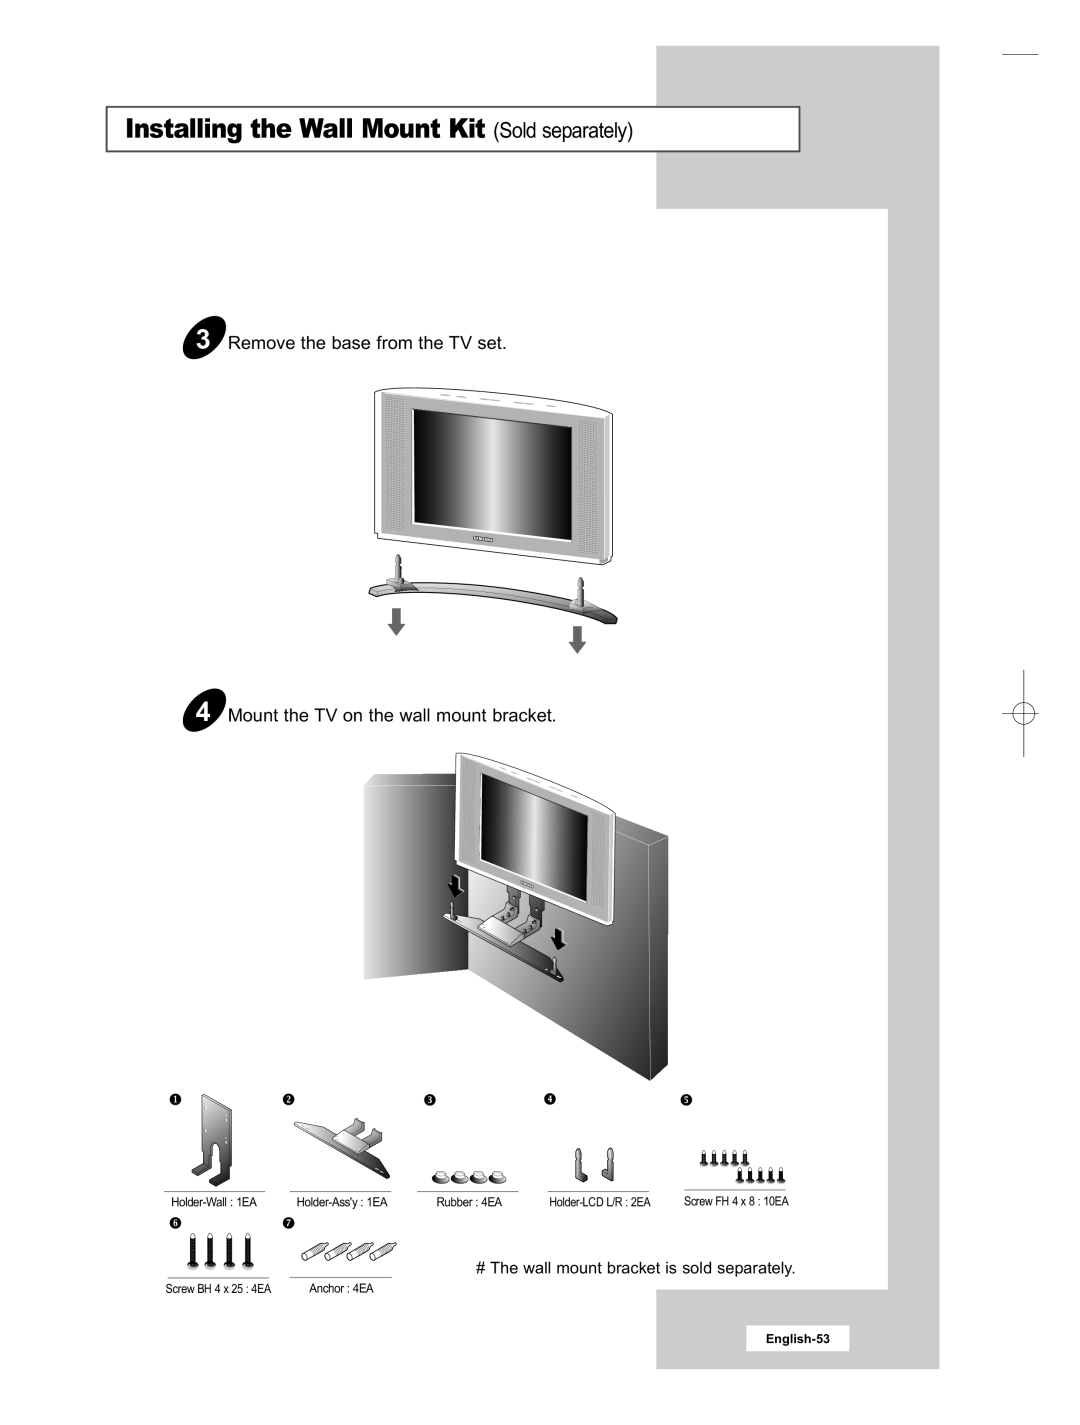 Samsung LE15E31S Remove the base from the TV set, Mount the TV on the wall mount bracket, English-53, Screw FH 4 x 8 10EA 